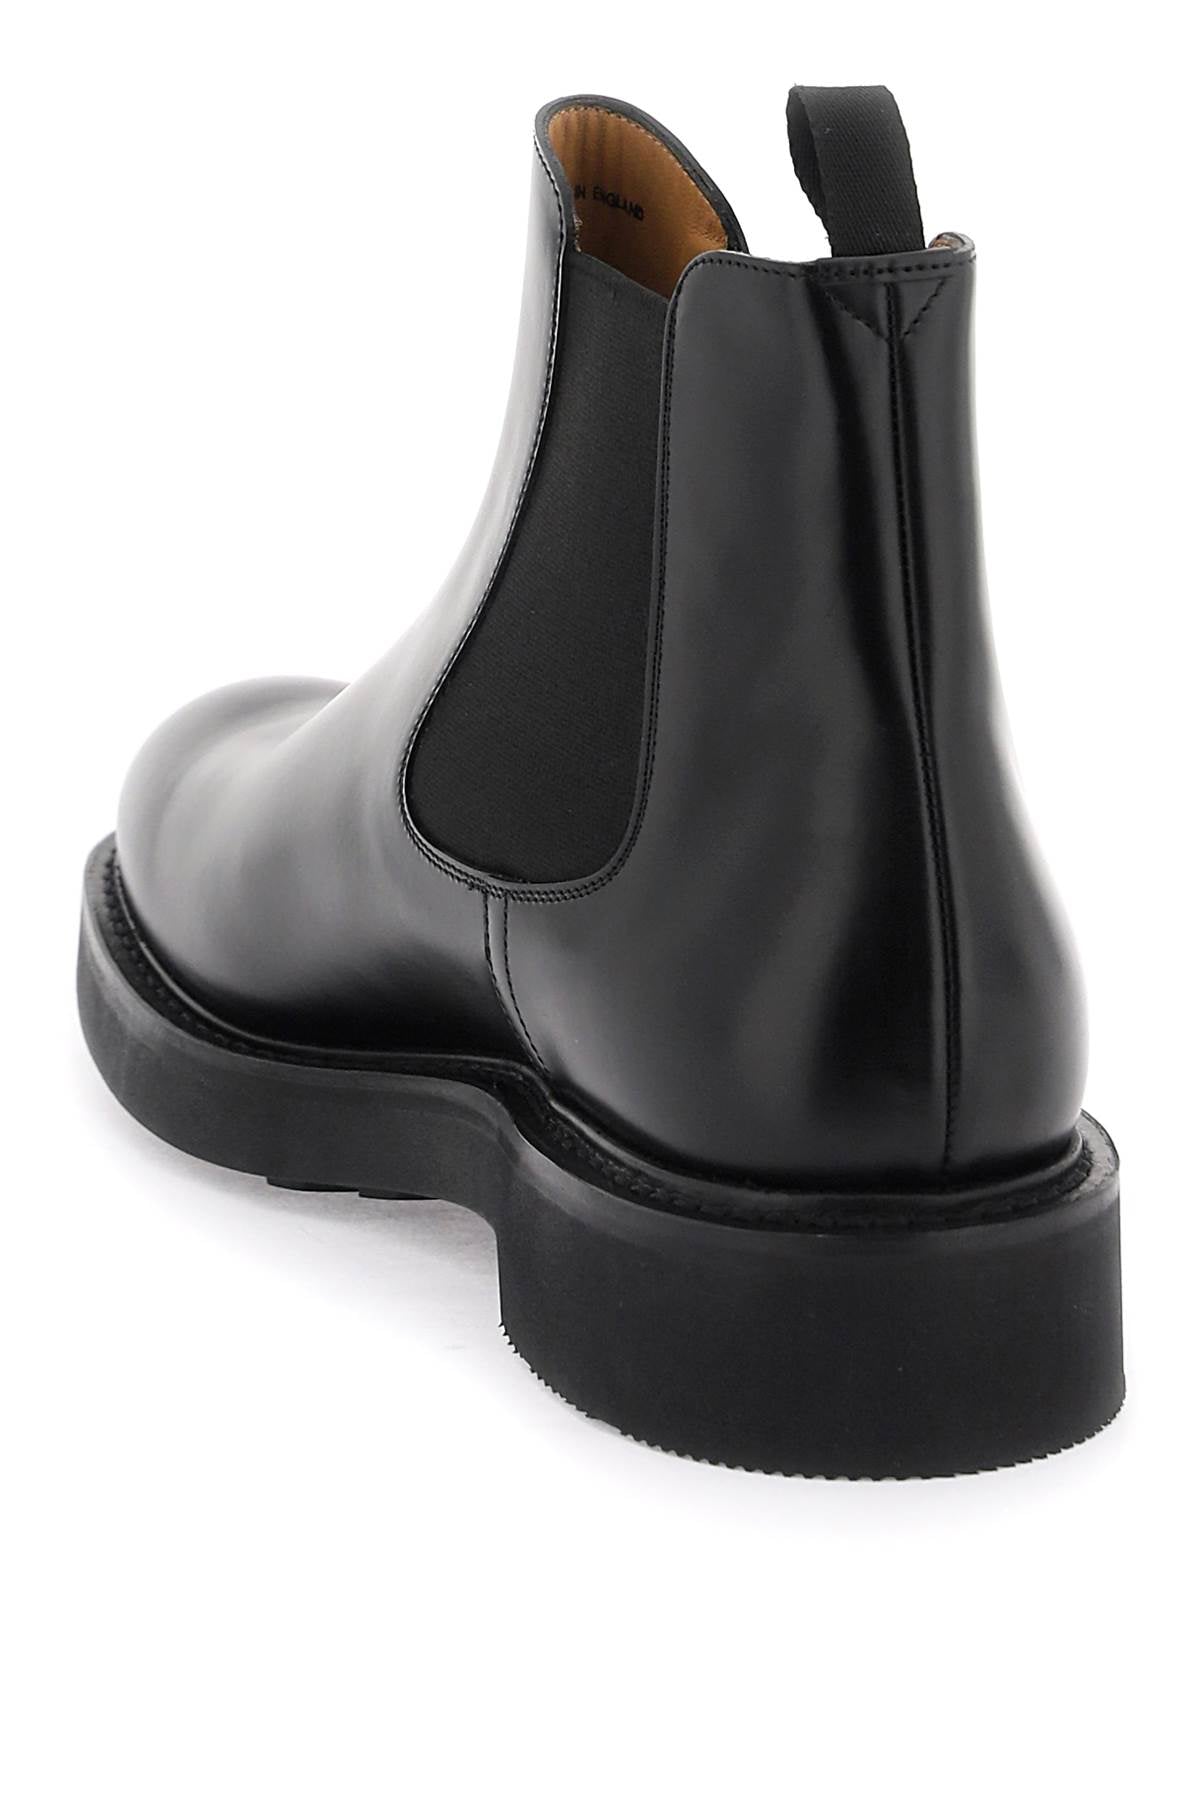 CHURCH'S Semi-Gloss Leather Chelsea Boots for Men in Classic Black